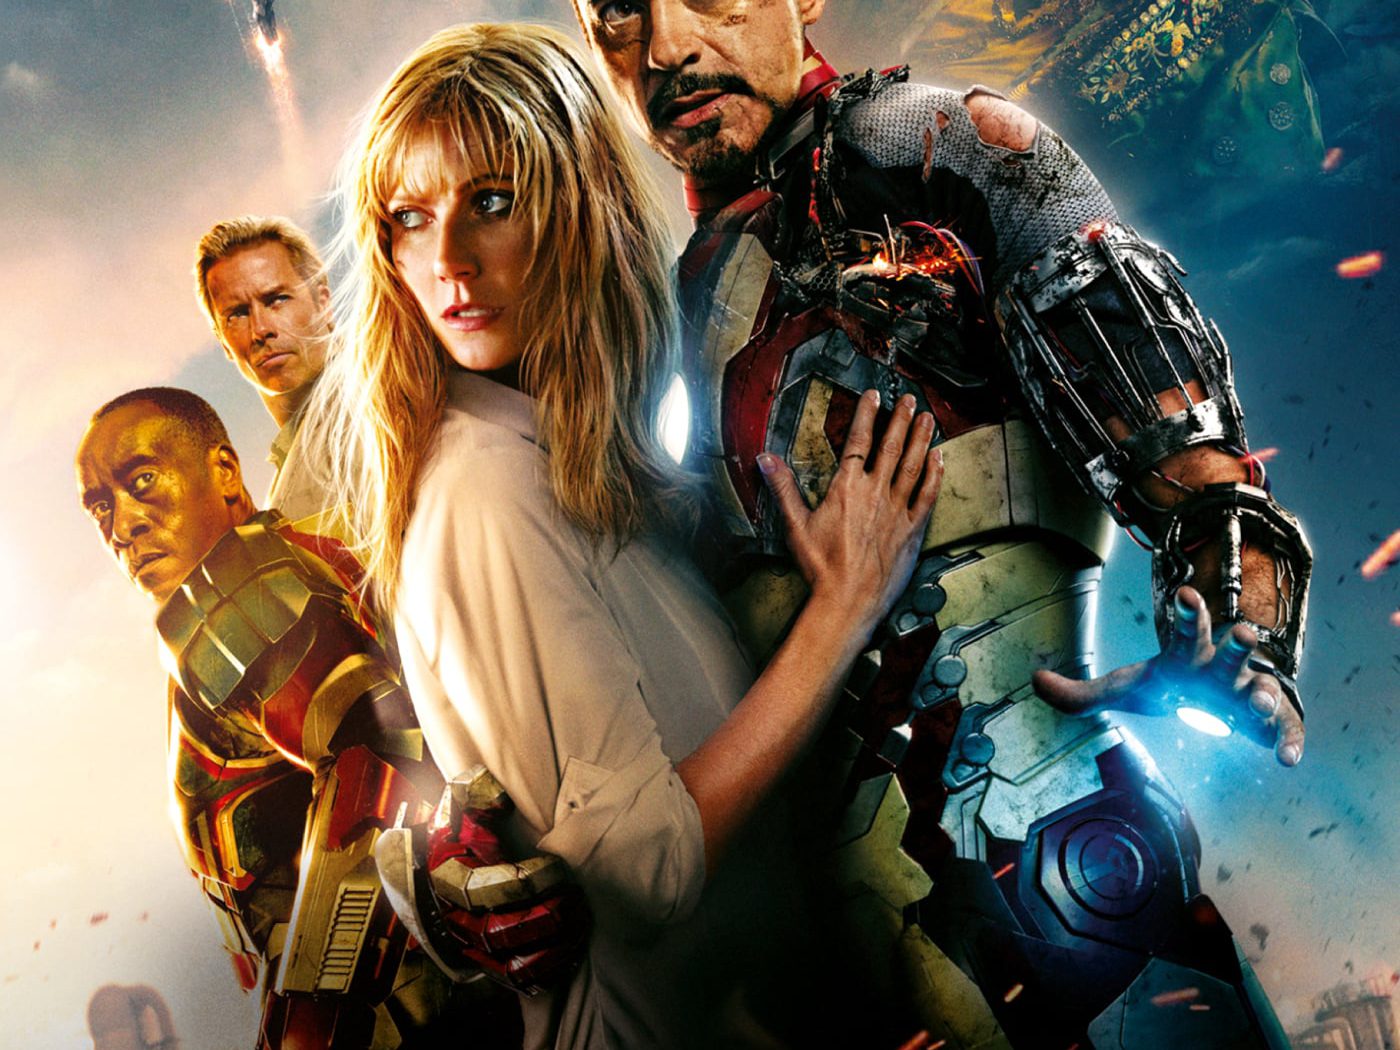 Poster for the movie "Iron Man 3"